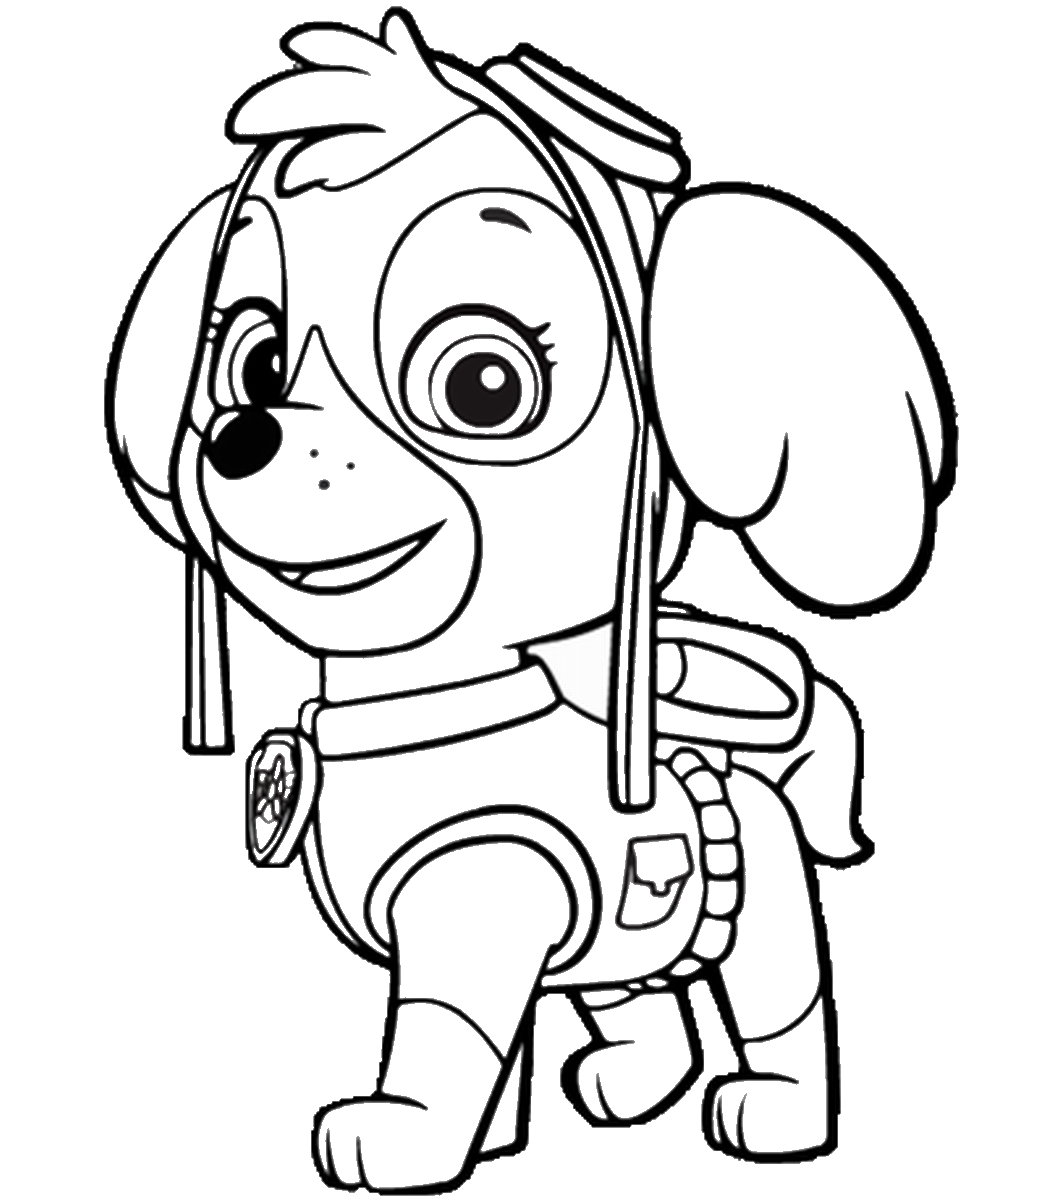 paw-patrol-coloring-pages-best-coloring-pages-for-kids